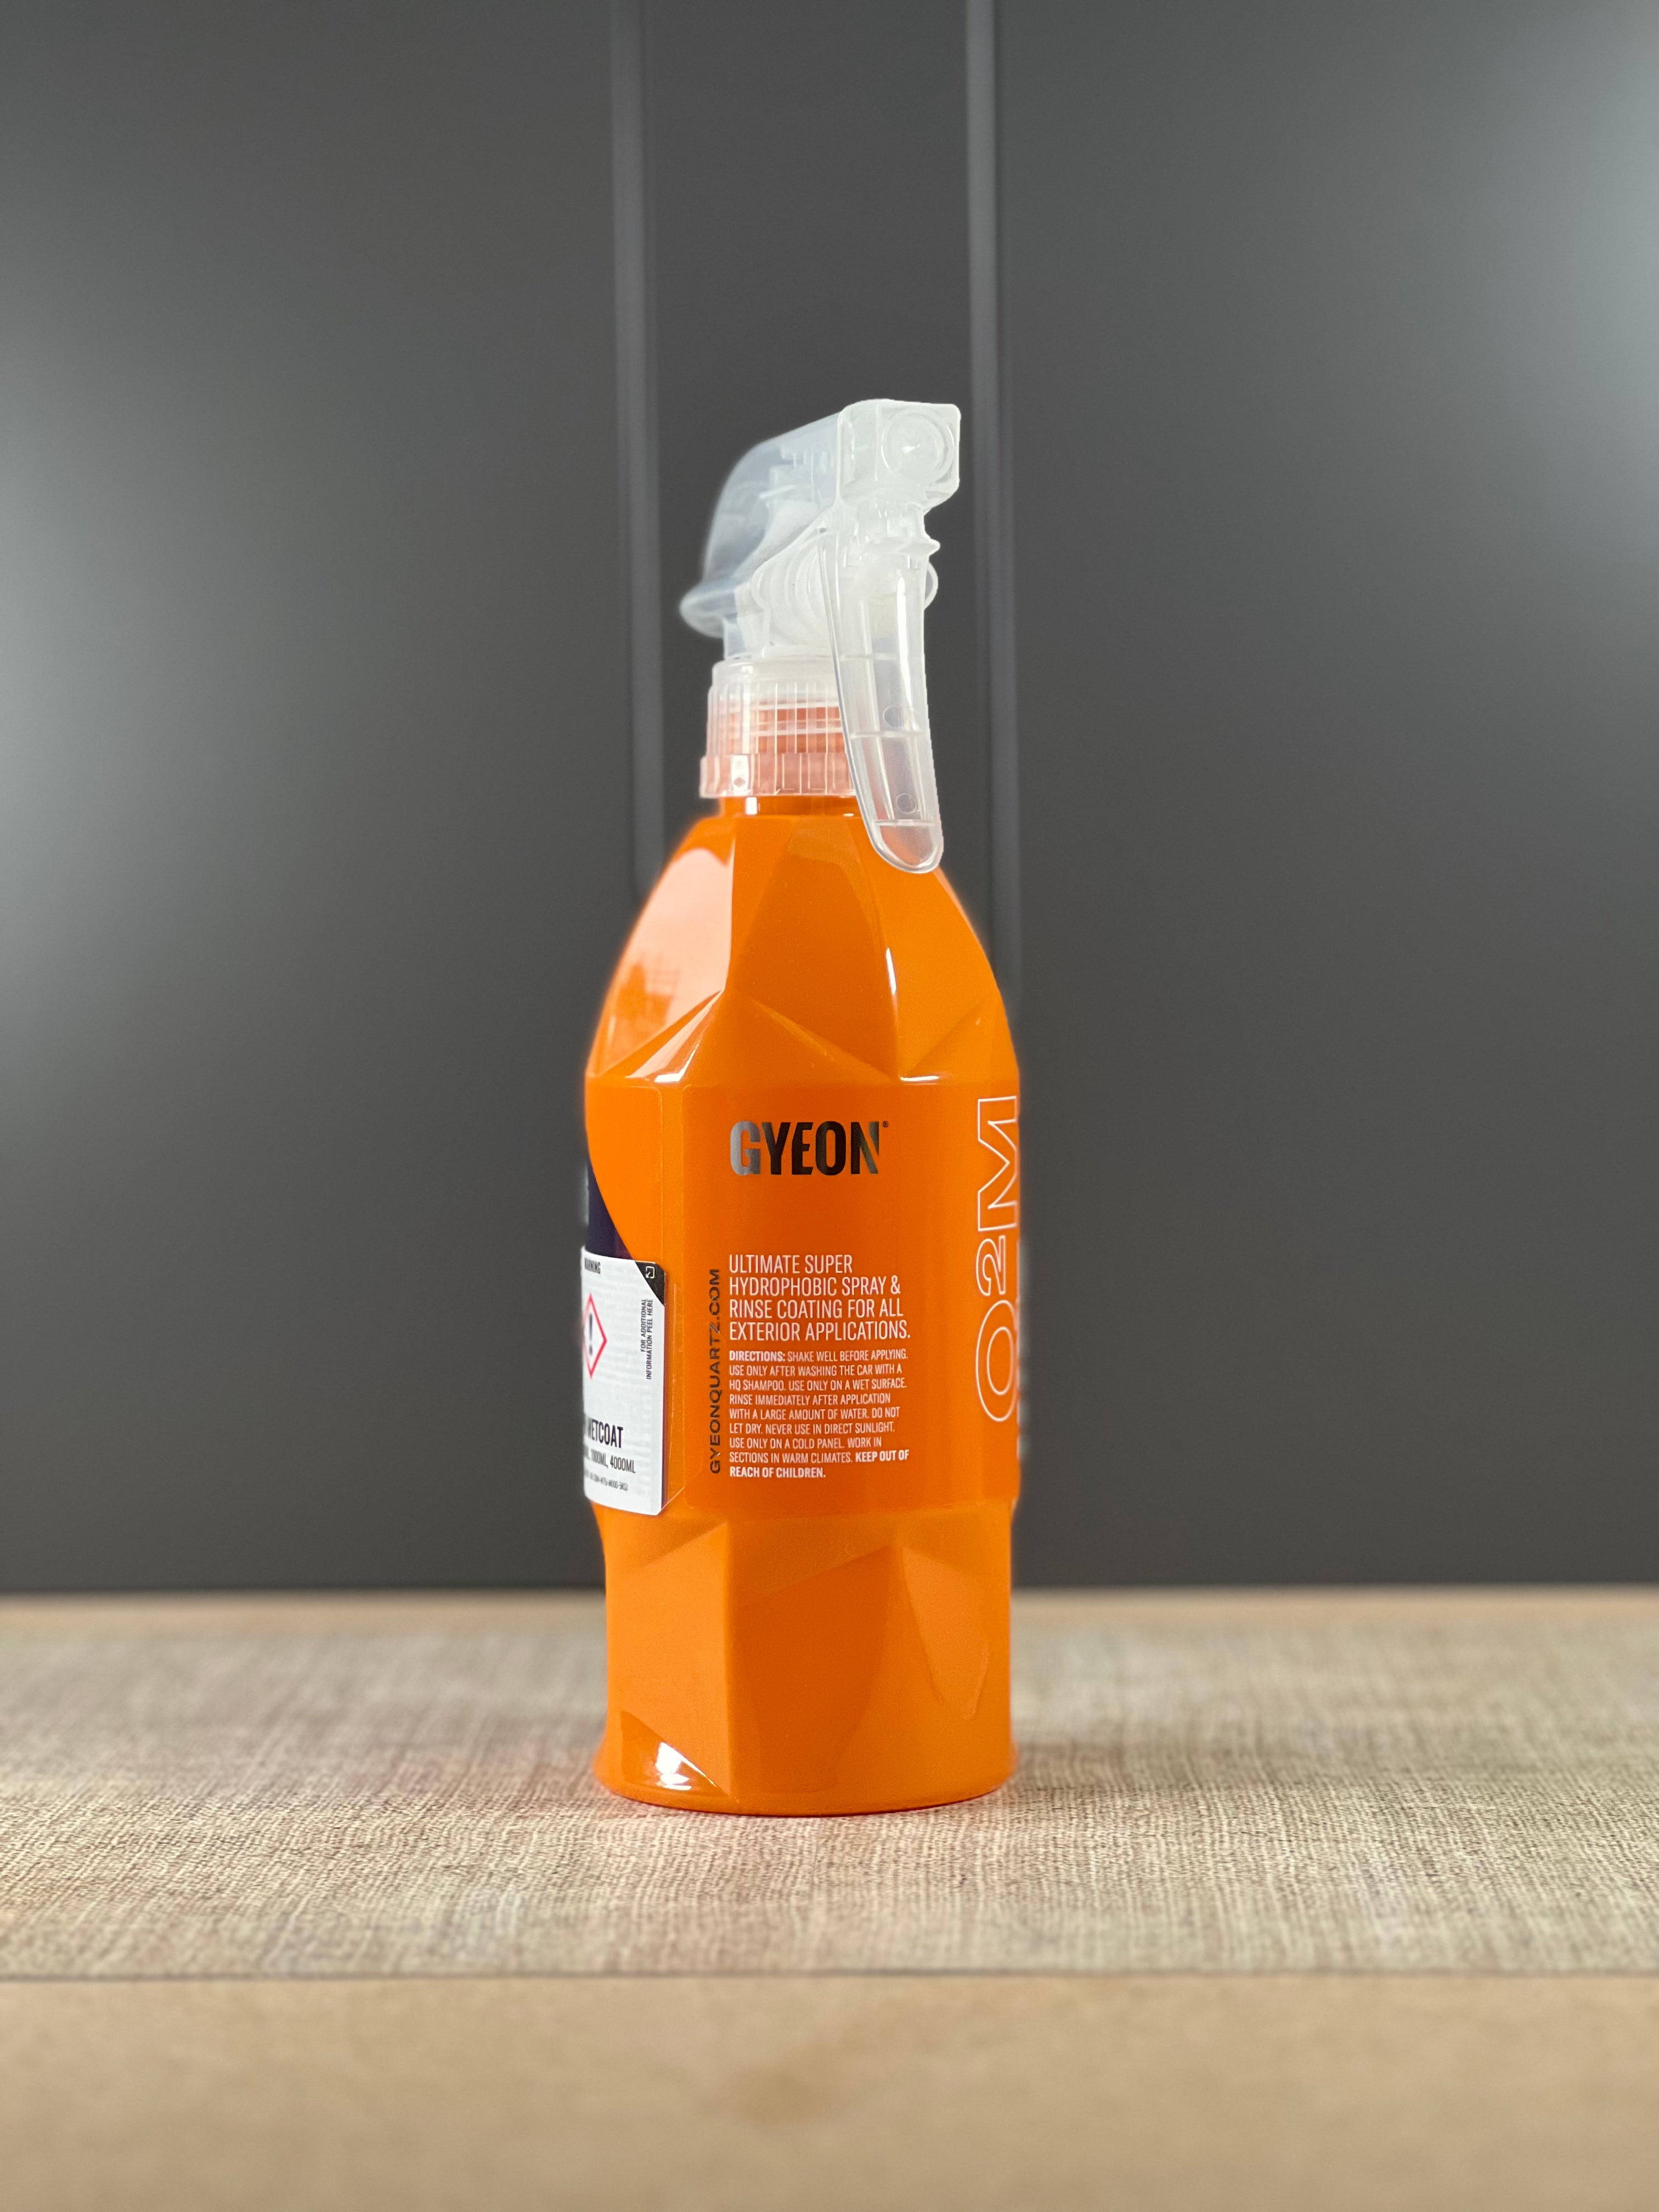 Gyeon Wet Coat 1st Use - Spray and Rinse Hydrophobic Coating Review 